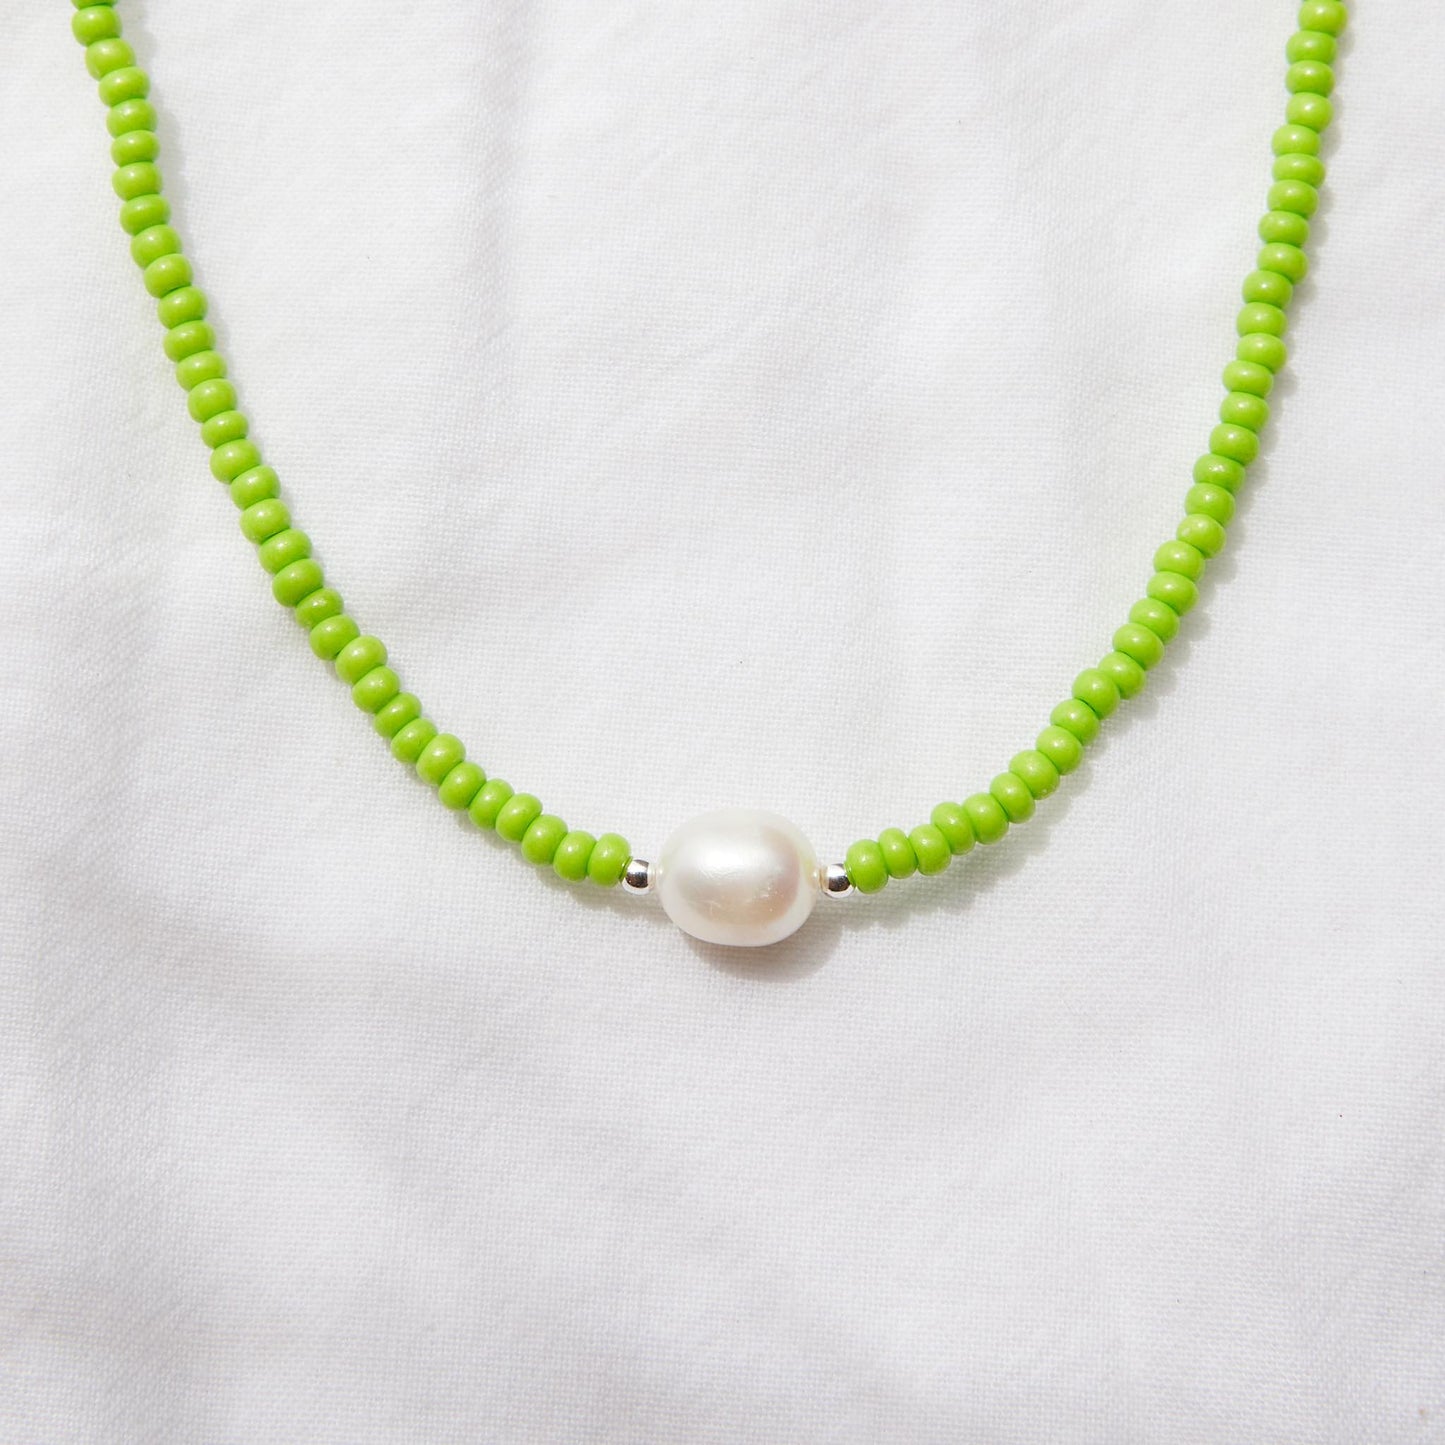 Lime Green love necklace